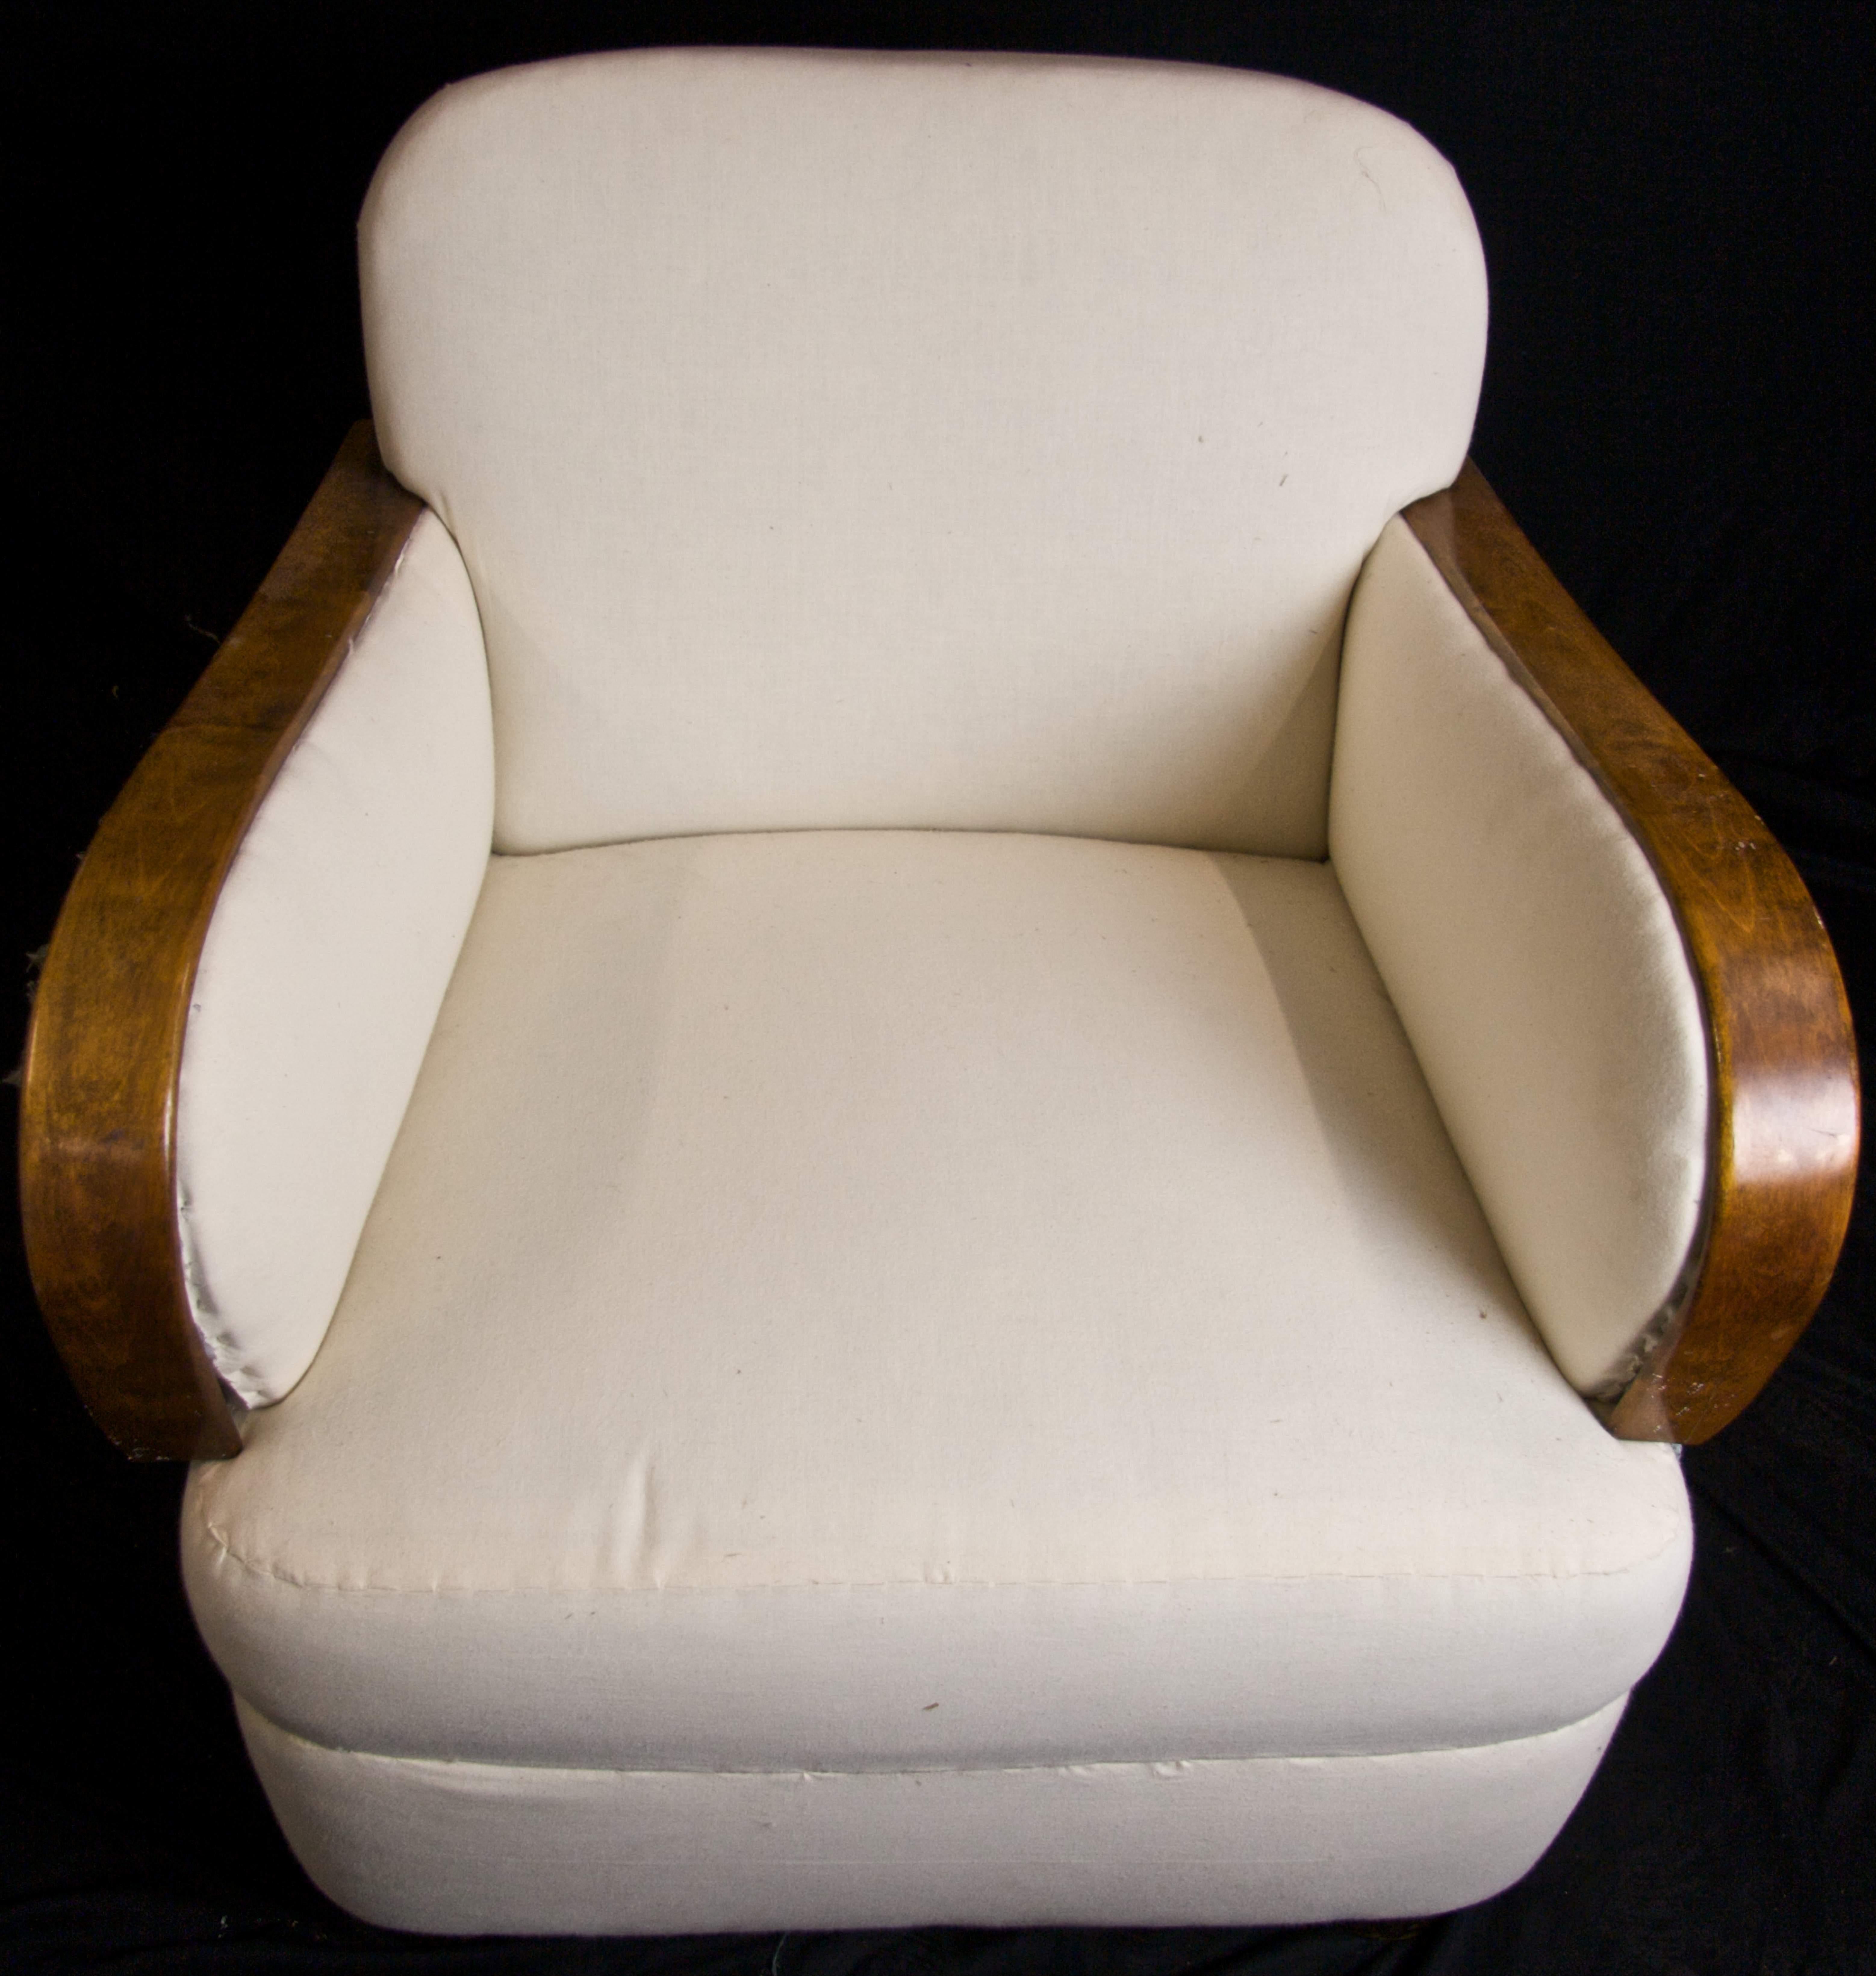 This is an unusual pair of original Swedish Art Deco armchairs with deep padded seats and back and shorter golden birch bentwood arms in a rich honey color French polish finish.

The extra deep fully sprung seats on these armchairs make for a